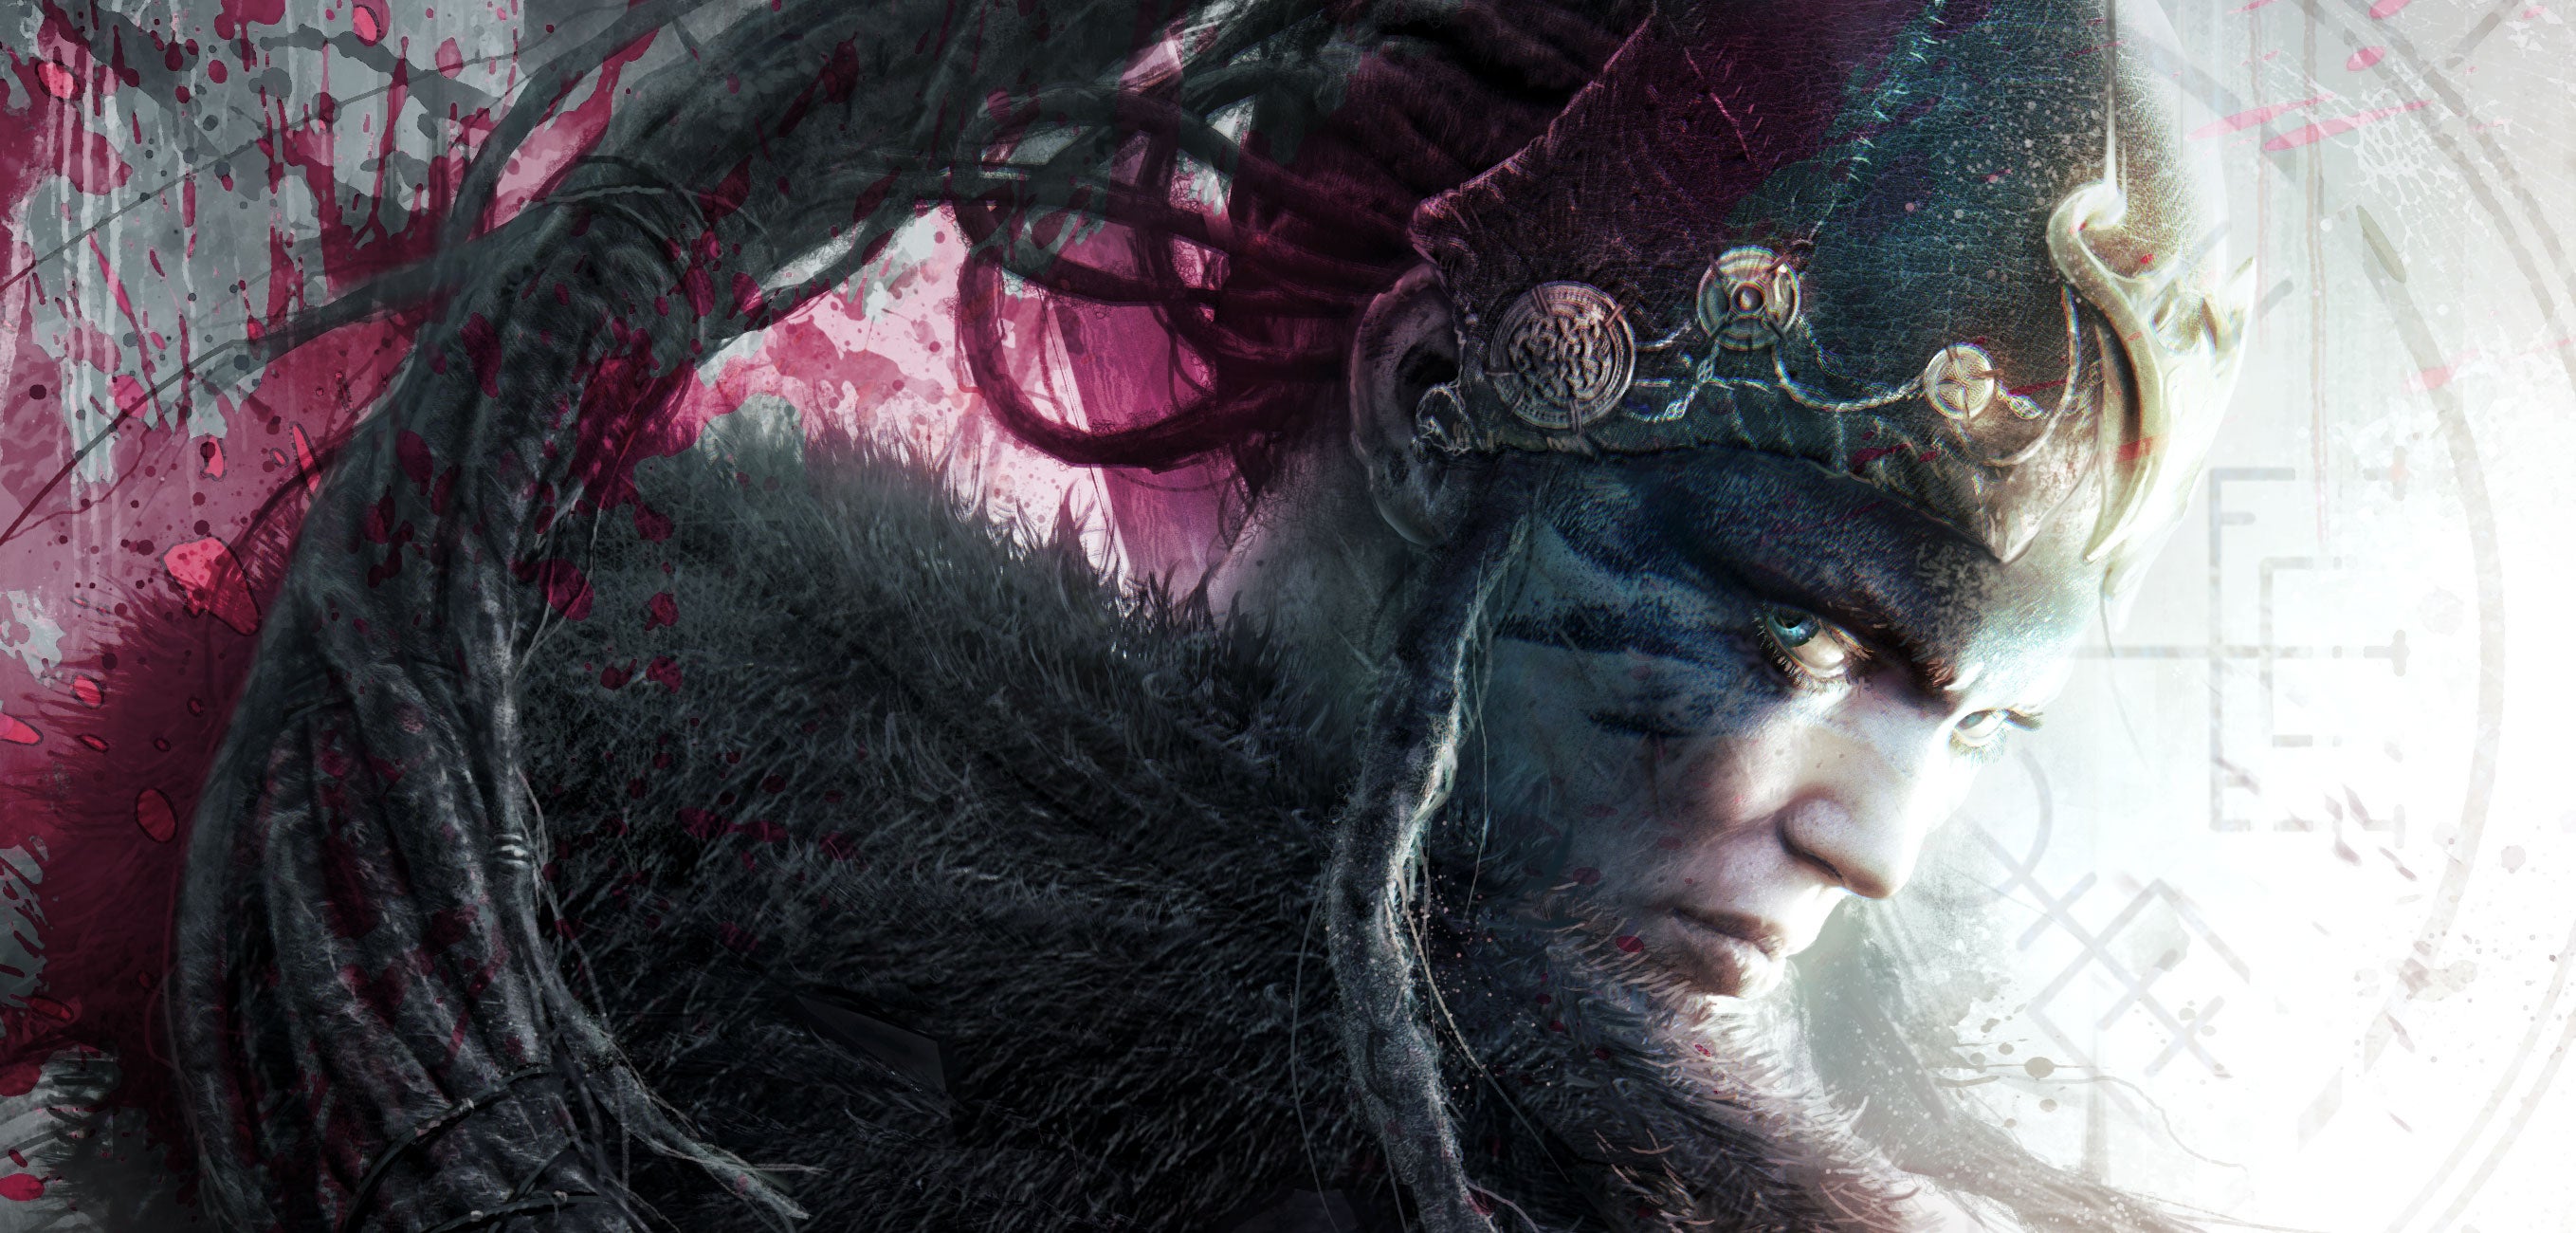 Image for Hellblade: Senua’s Sacrifice coming to Xbox One, with 3 modes on Xbox One X